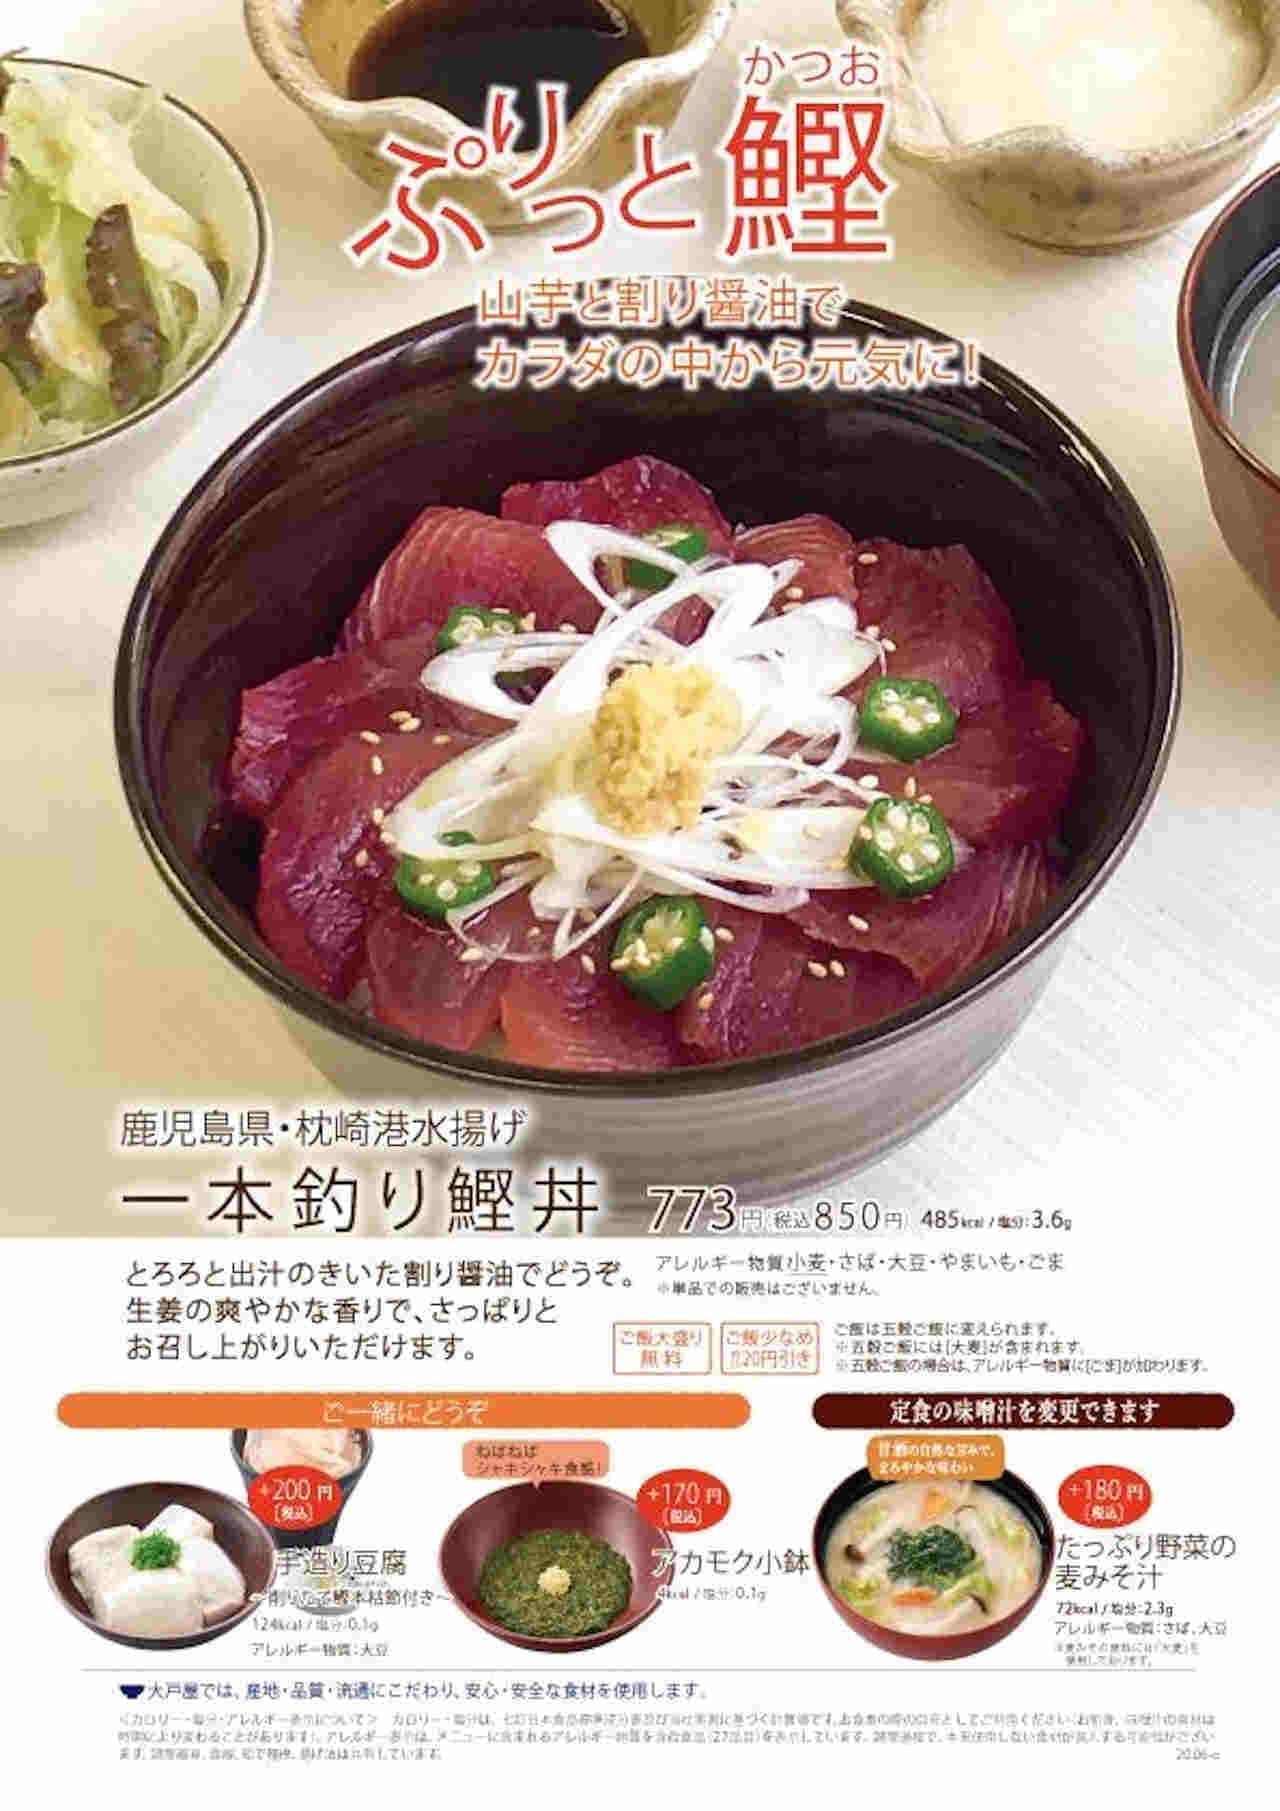 "Pork ginger-grilled rice bowl" and "Ippon fishing bonito rice bowl" are now available at Ootoya